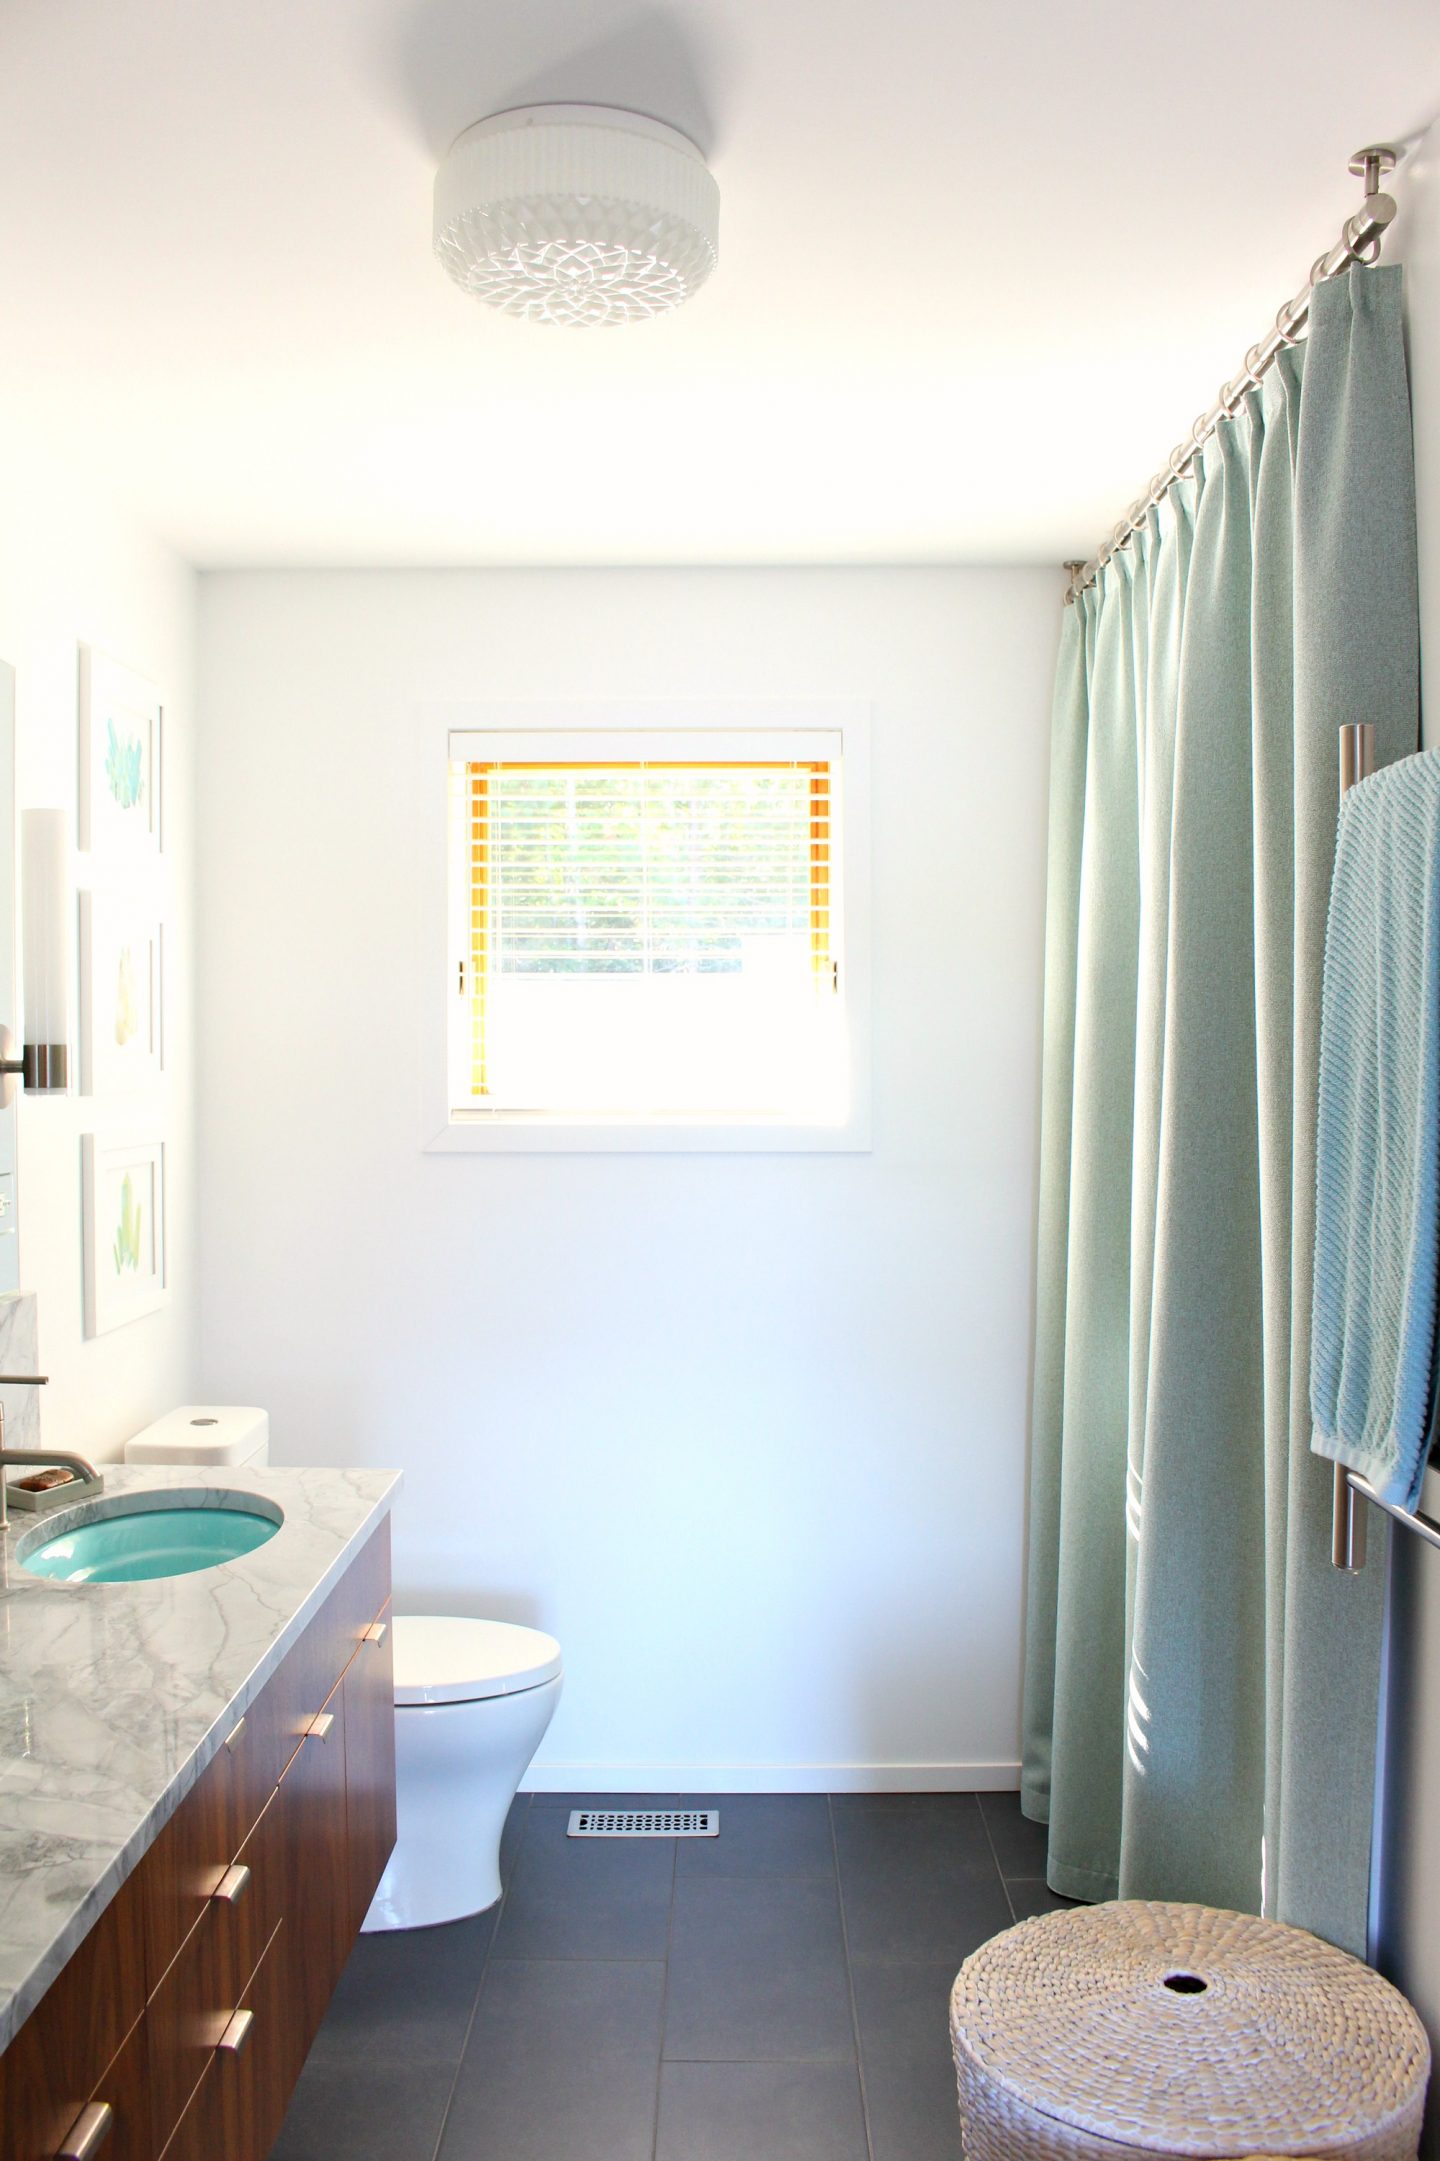 Bathroom Update: Ceiling Mounted Shower Curtain Rod + Turquoise Tweed Pleated Shower Curtain